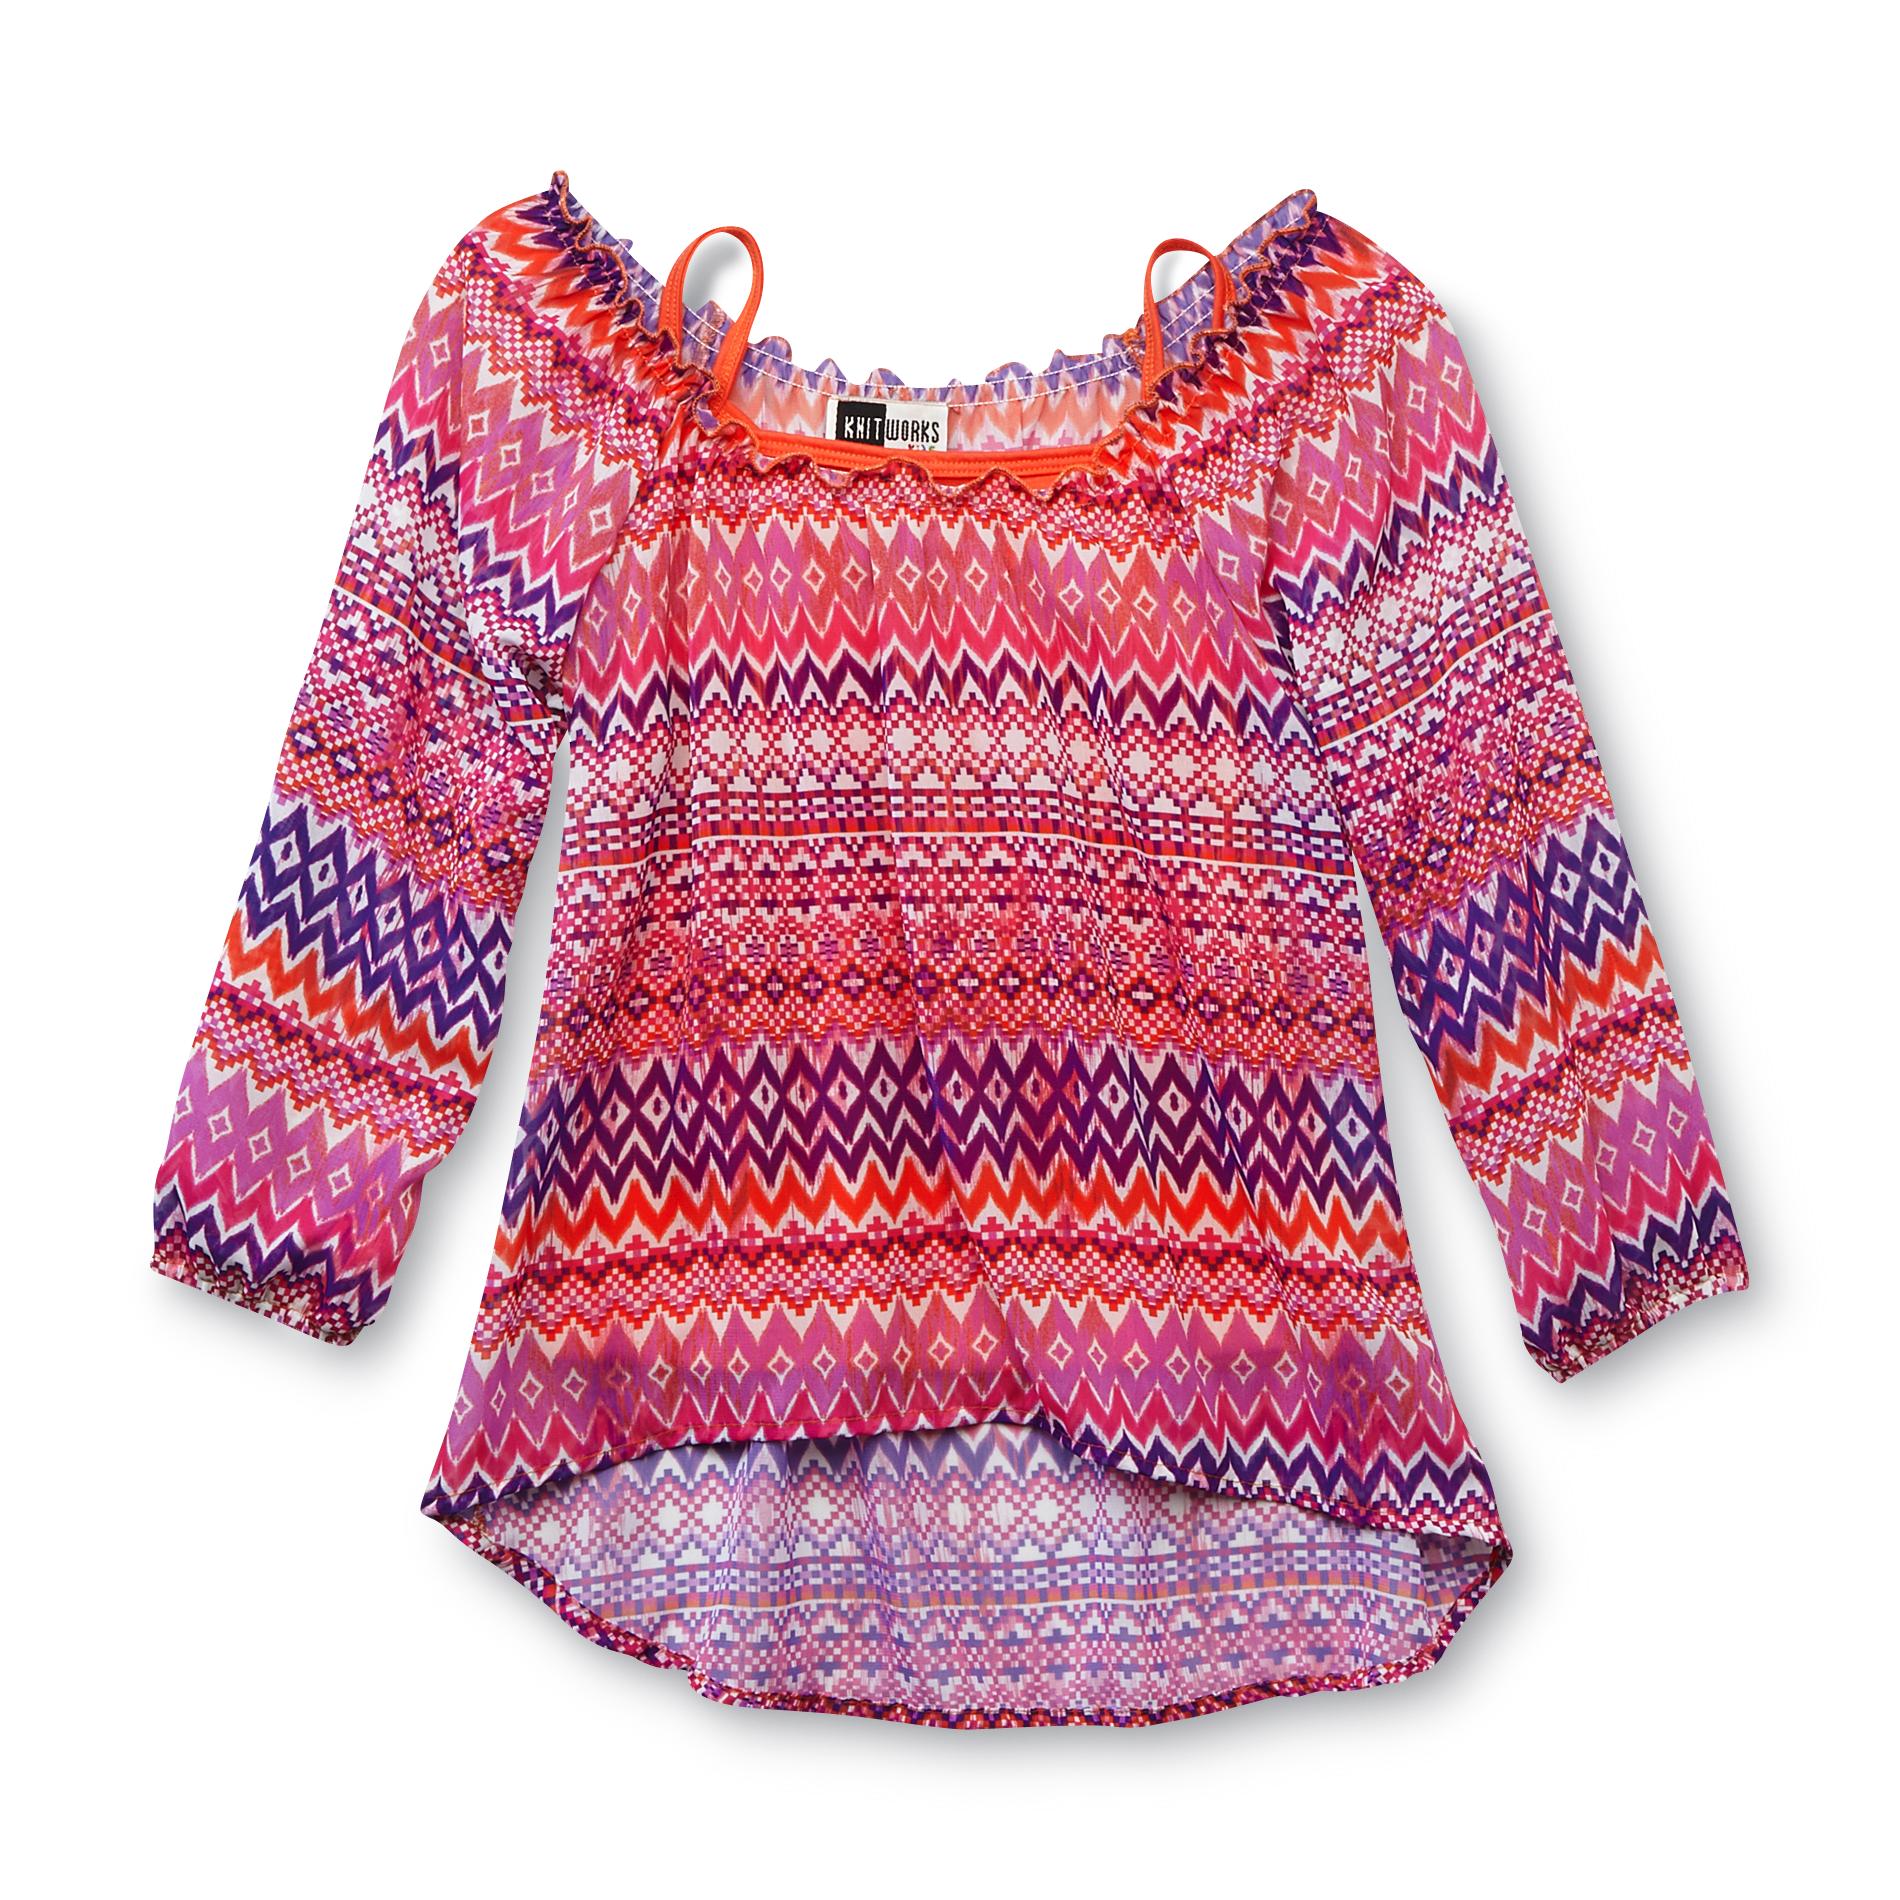 Knitworks Kids Girl's High-Low Sheer Blouse & Cami